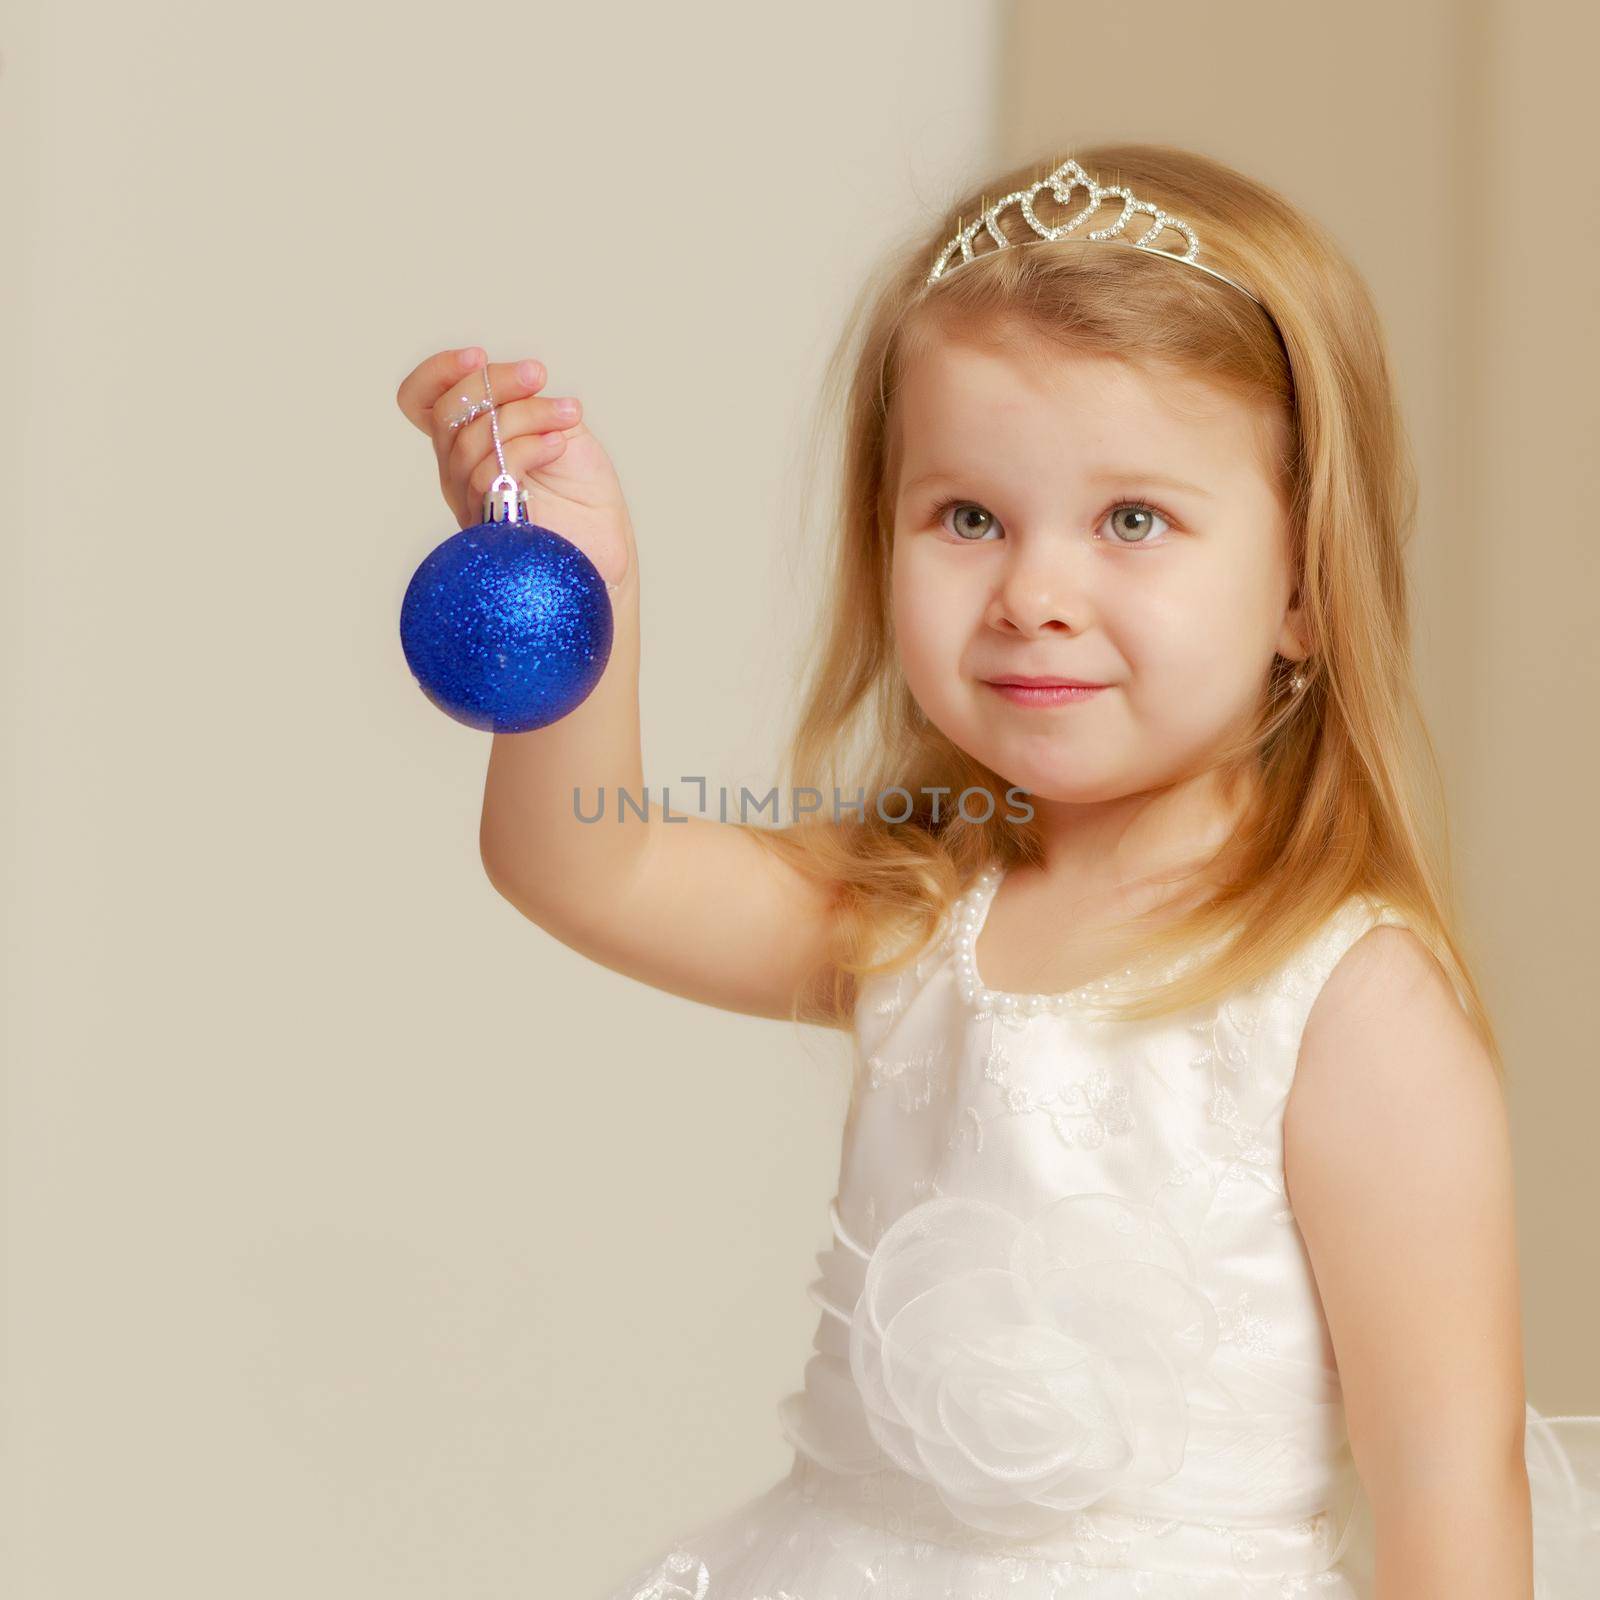 Cute little girl with christmas tree toy. New Year's concept, children's holidays.